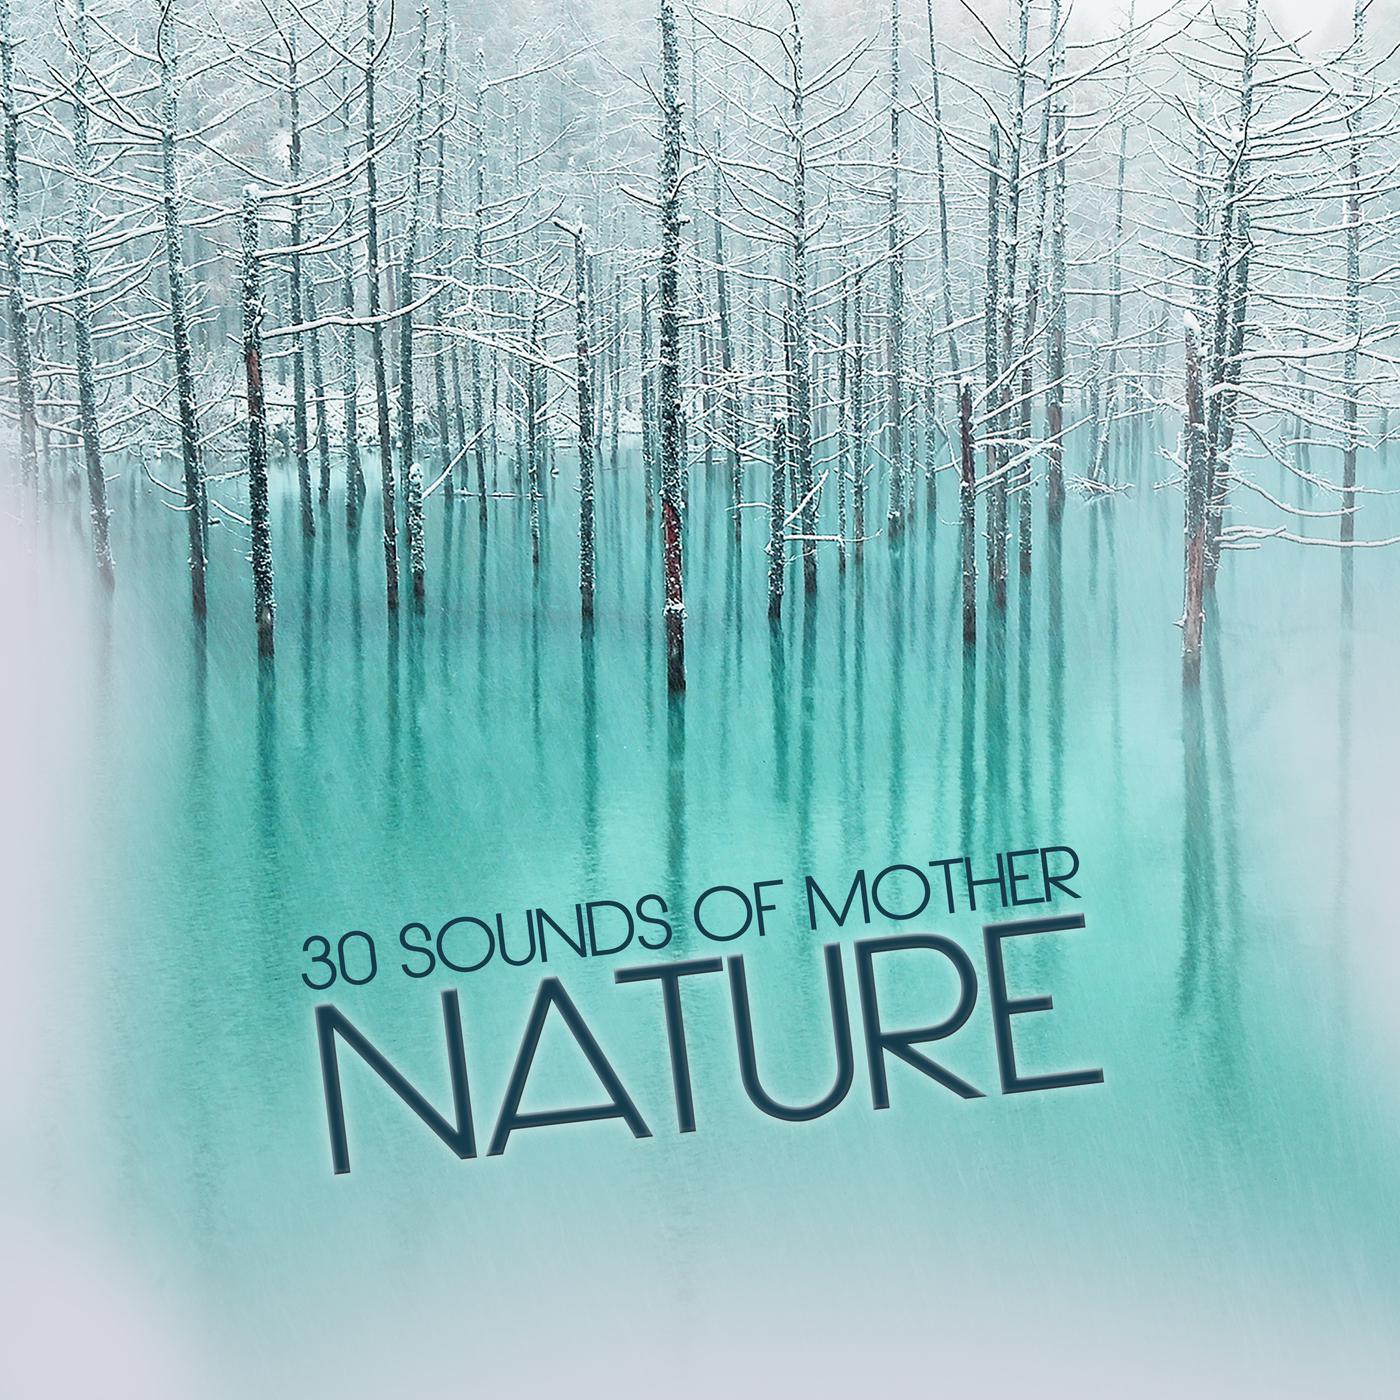 30 Sounds from Mother Nature